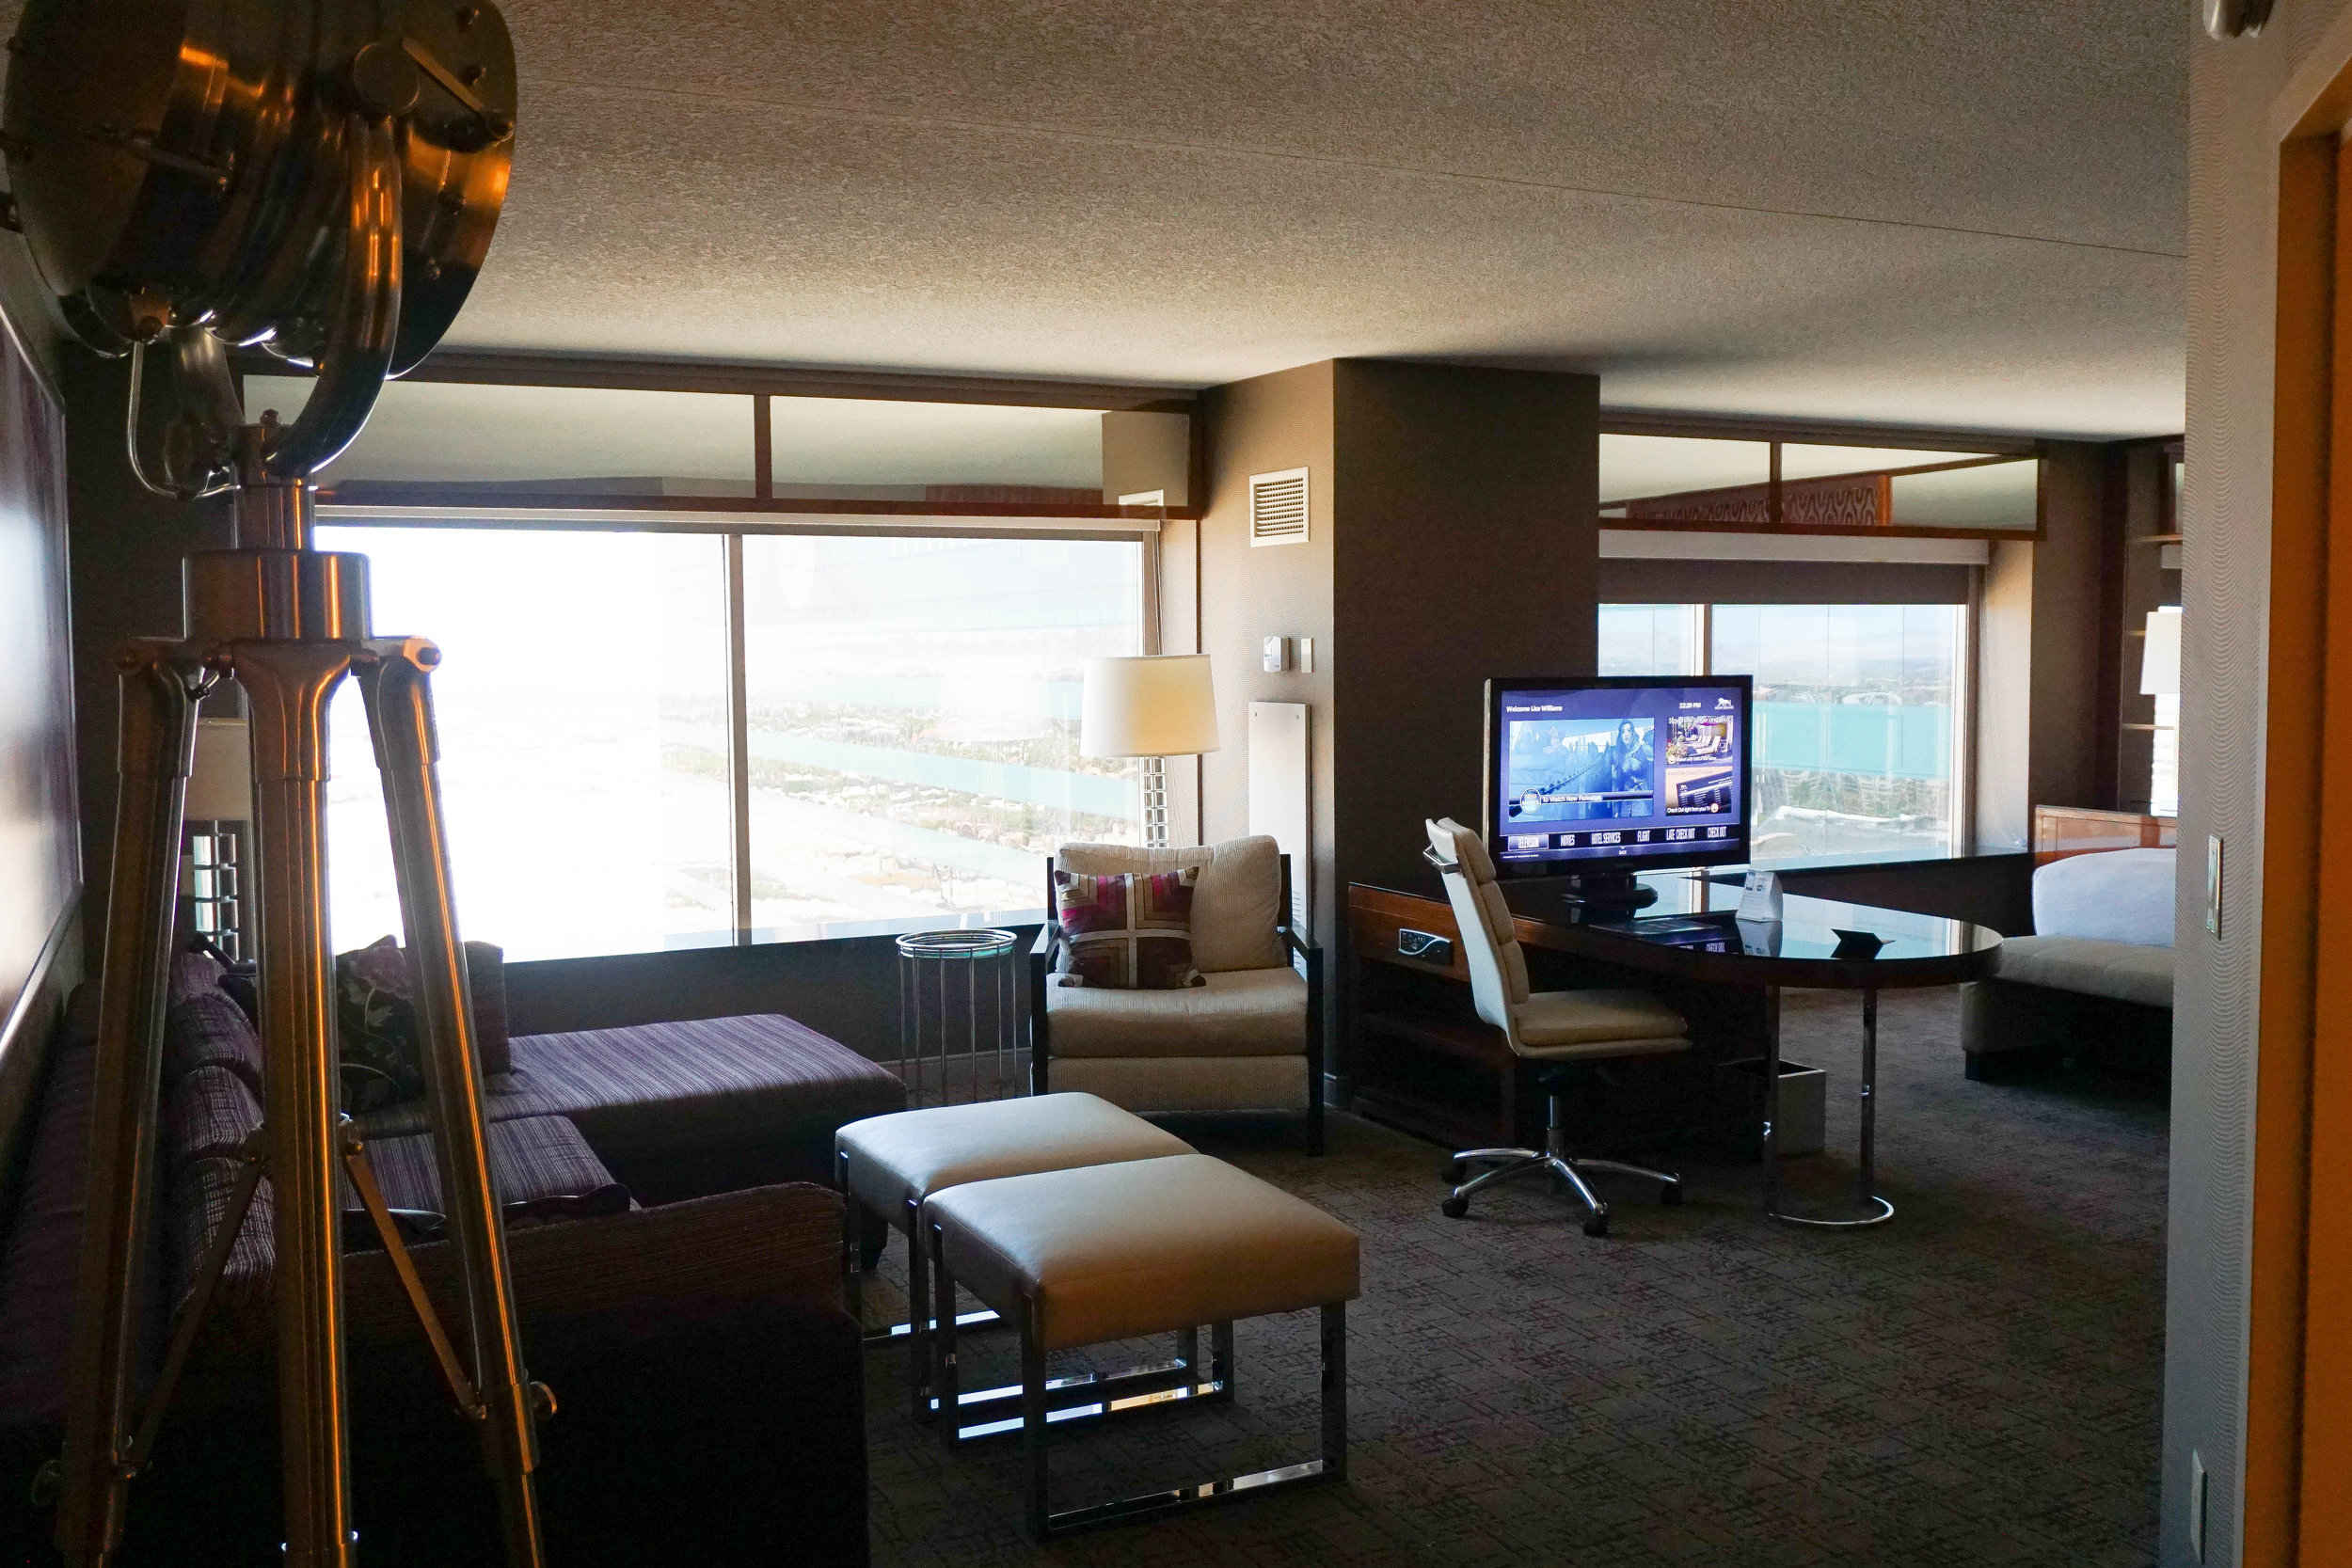 Mgm Grand Las Vegas Hotel Executive King Suite Room Review